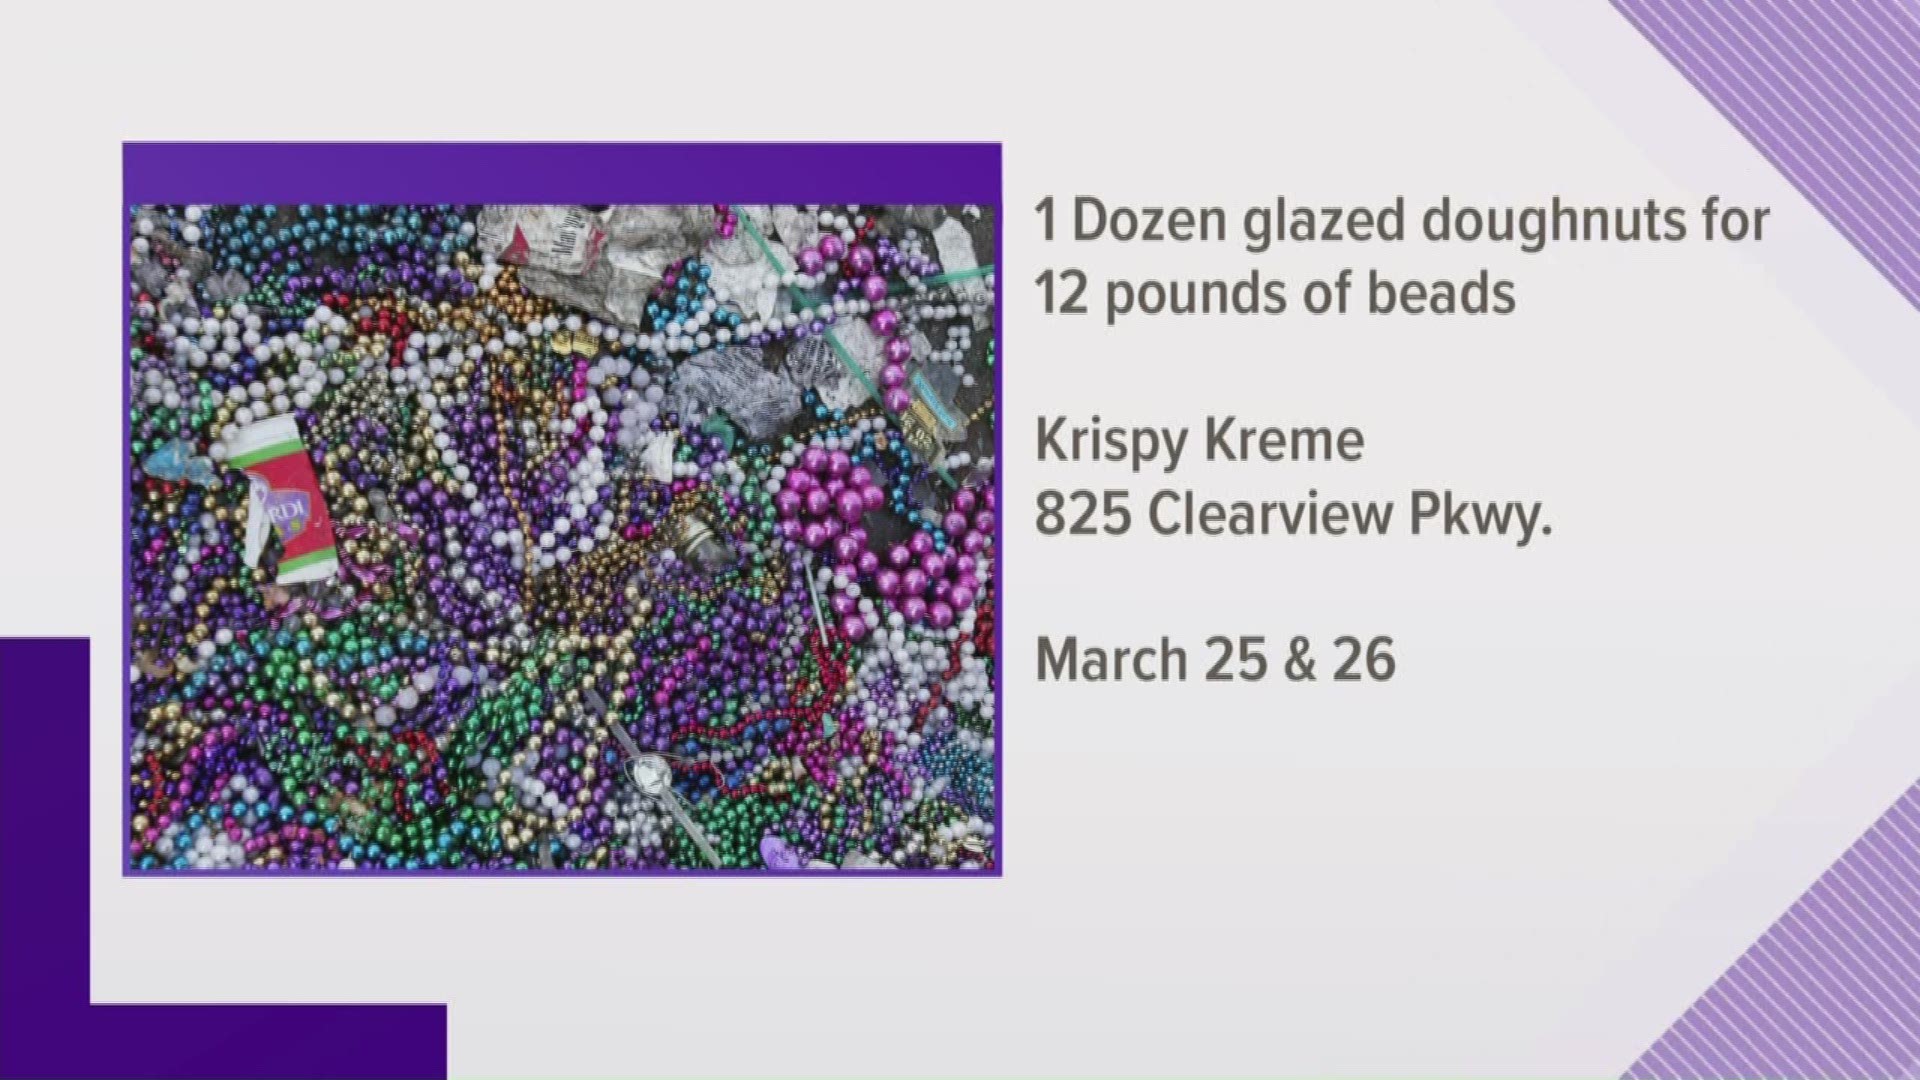 If you still have a lot of Mardi Gras beads laying around, you'll soon be able to cash them in for something sweet!